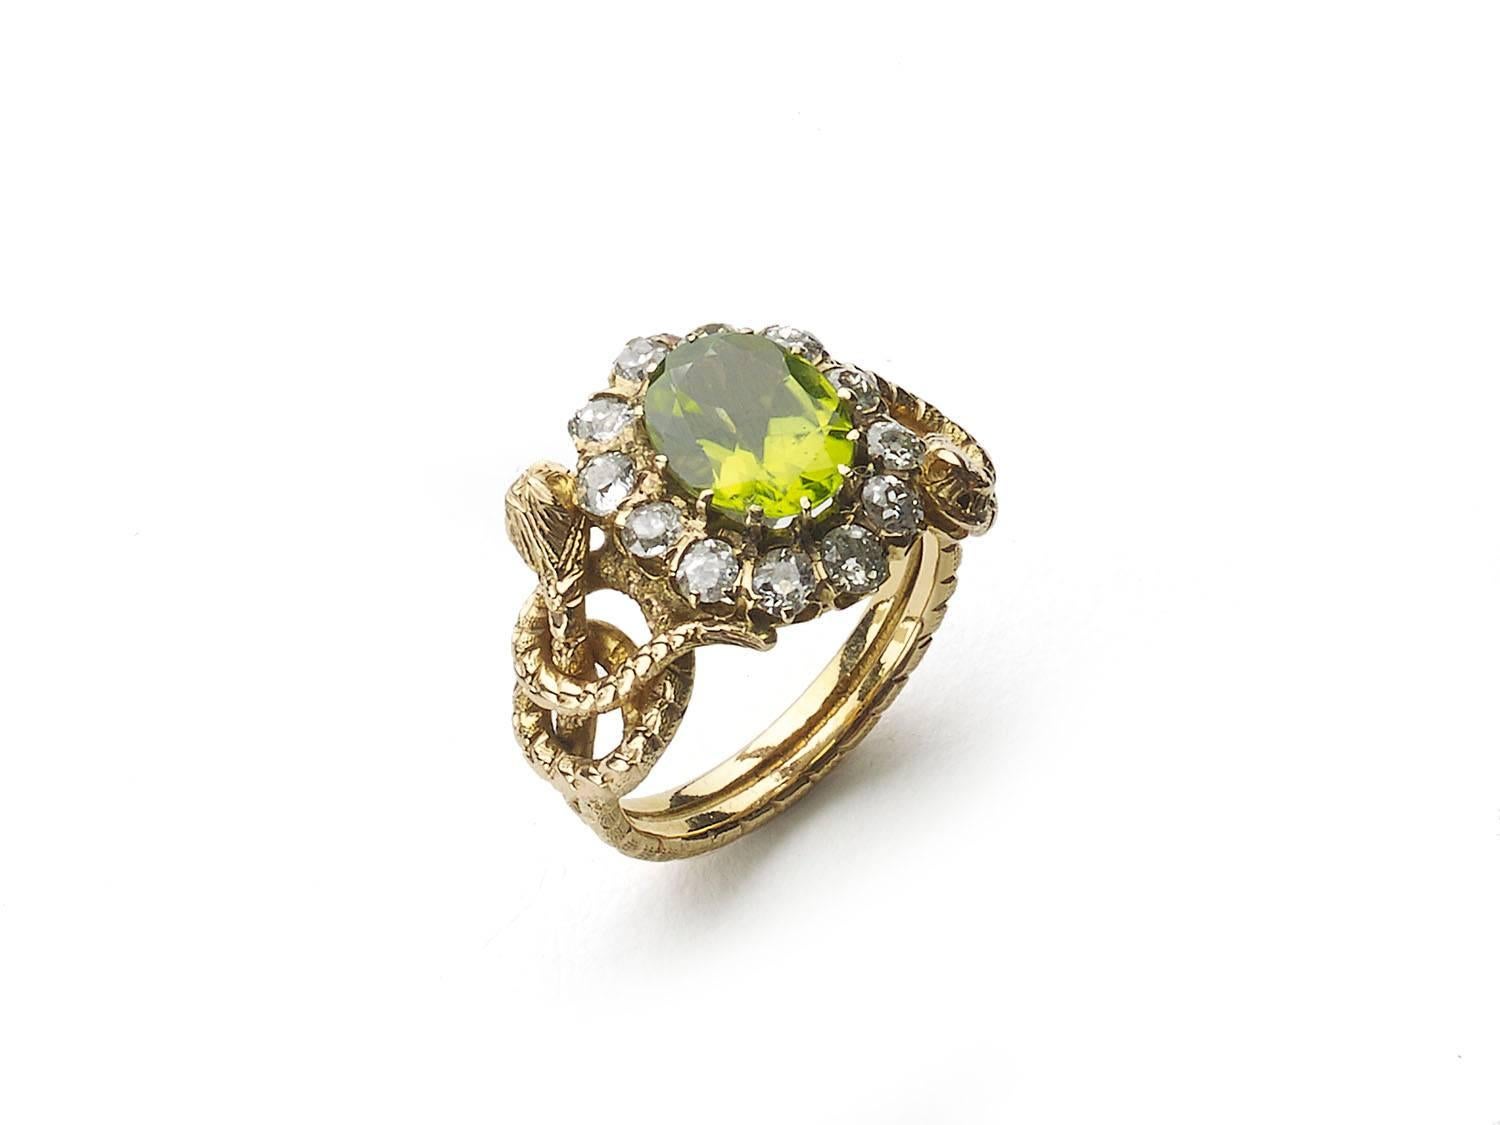 A Victorian peridot and diamond ring, central oval cut peridot weighing an estimated 1.20ct, surrounded by twelve old cut diamonds weighing an estimated total of 1.00ct, with a coiled snake to each shoulder, mounted in yellow gold, circa 1880, ring